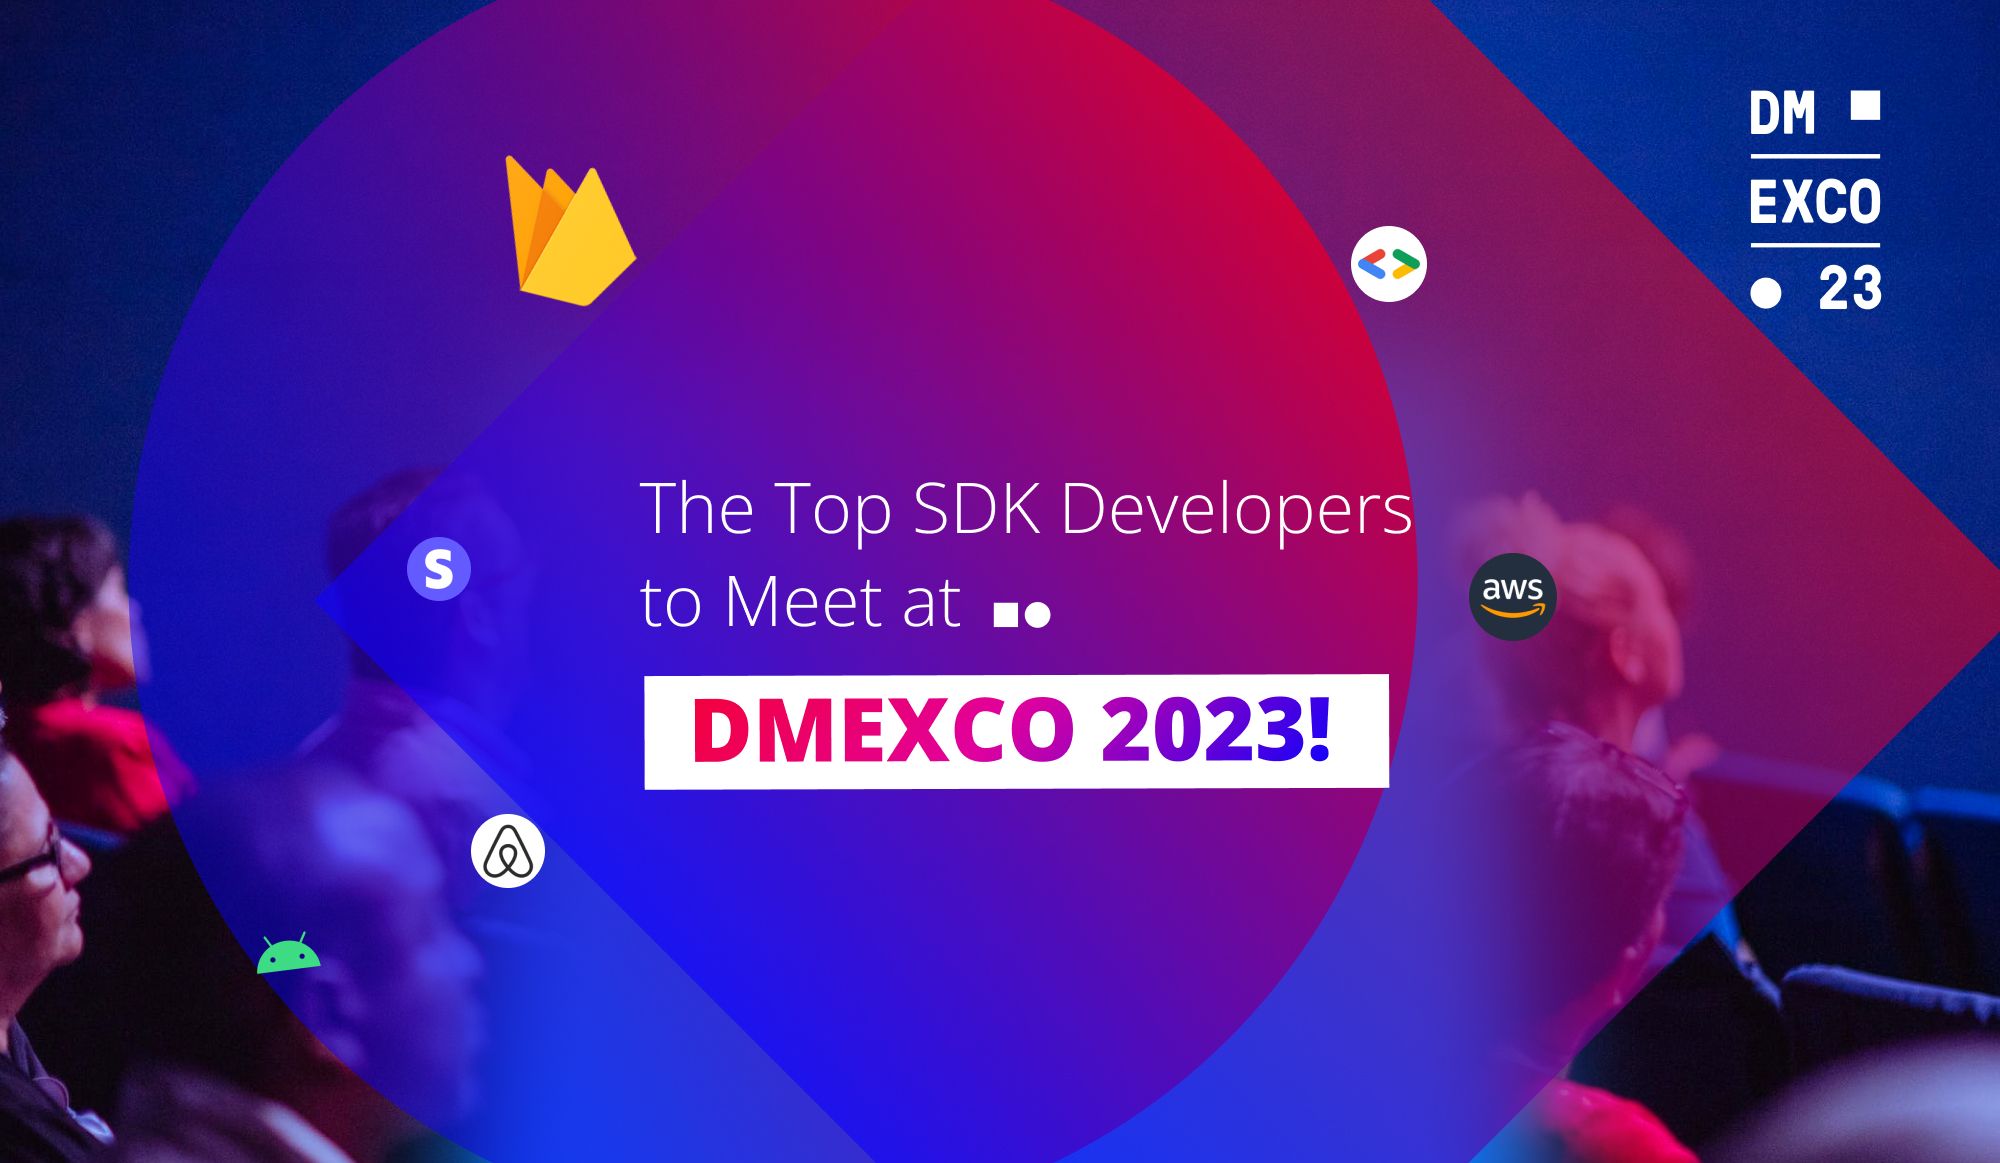 The Top SDK Developers to Meet at DMEXCO 2023